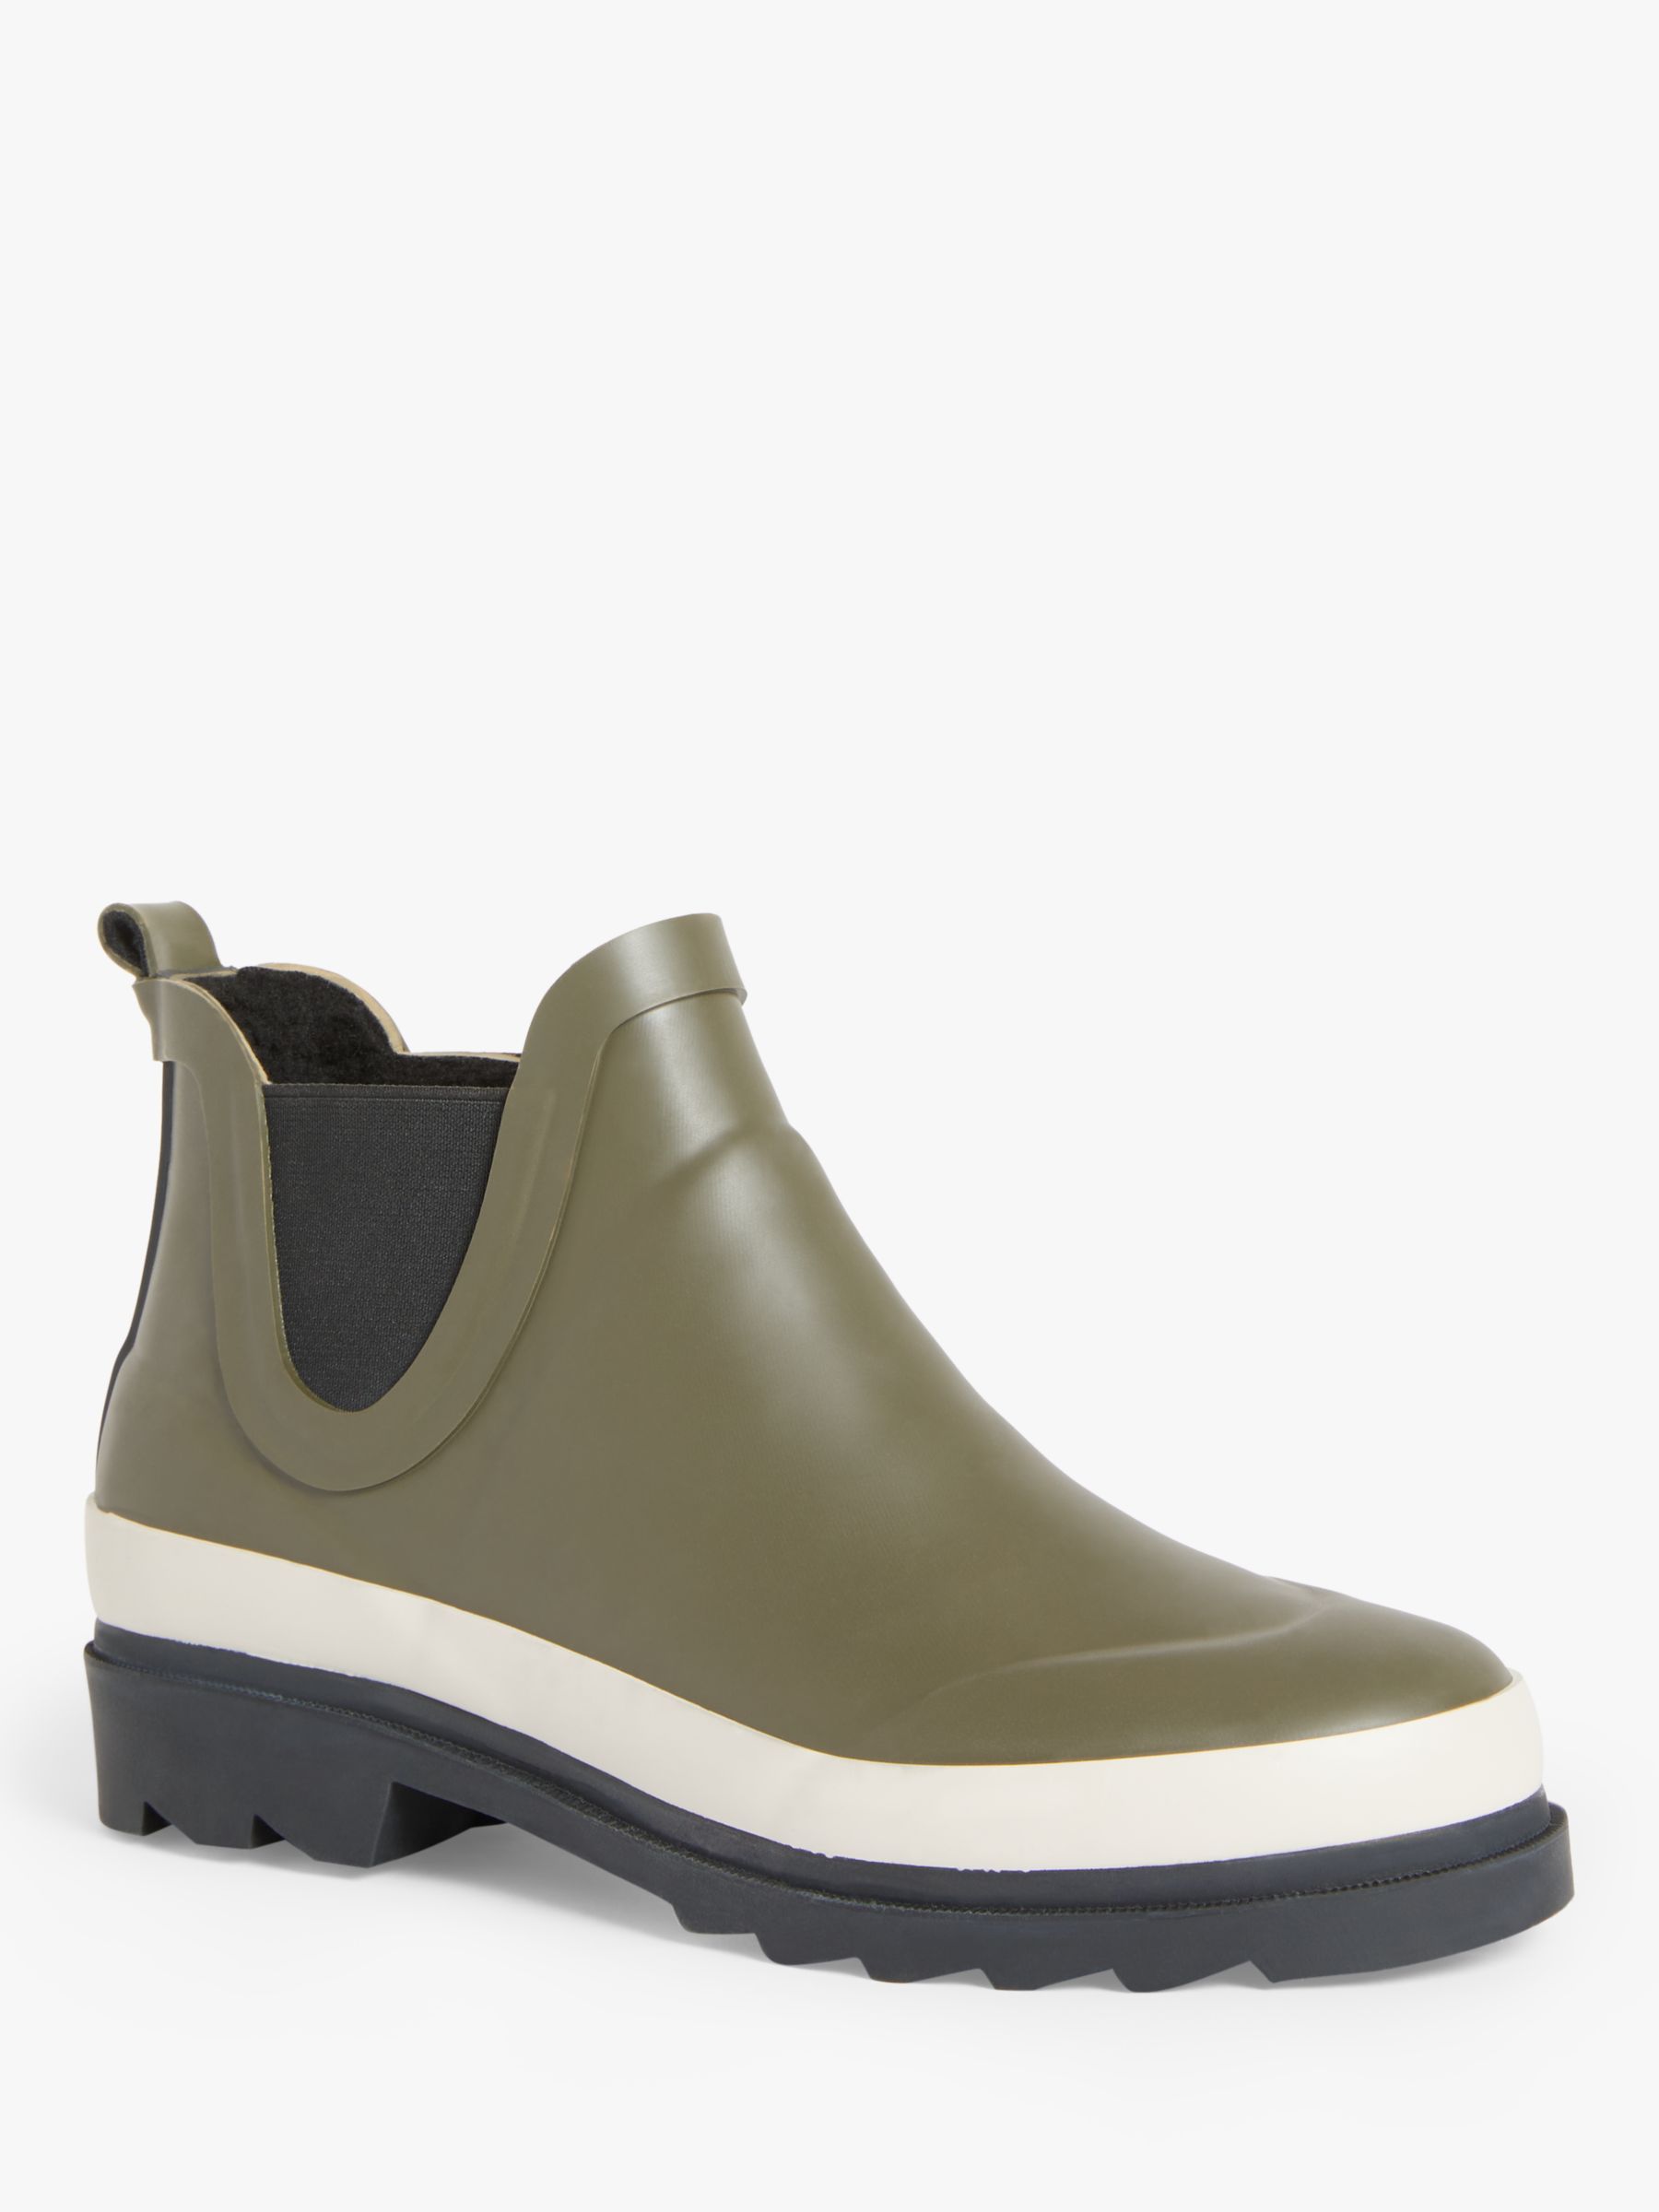 Kin Patience Rubber Cropped Wellie Boots, Khaki/Black at John Lewis ...